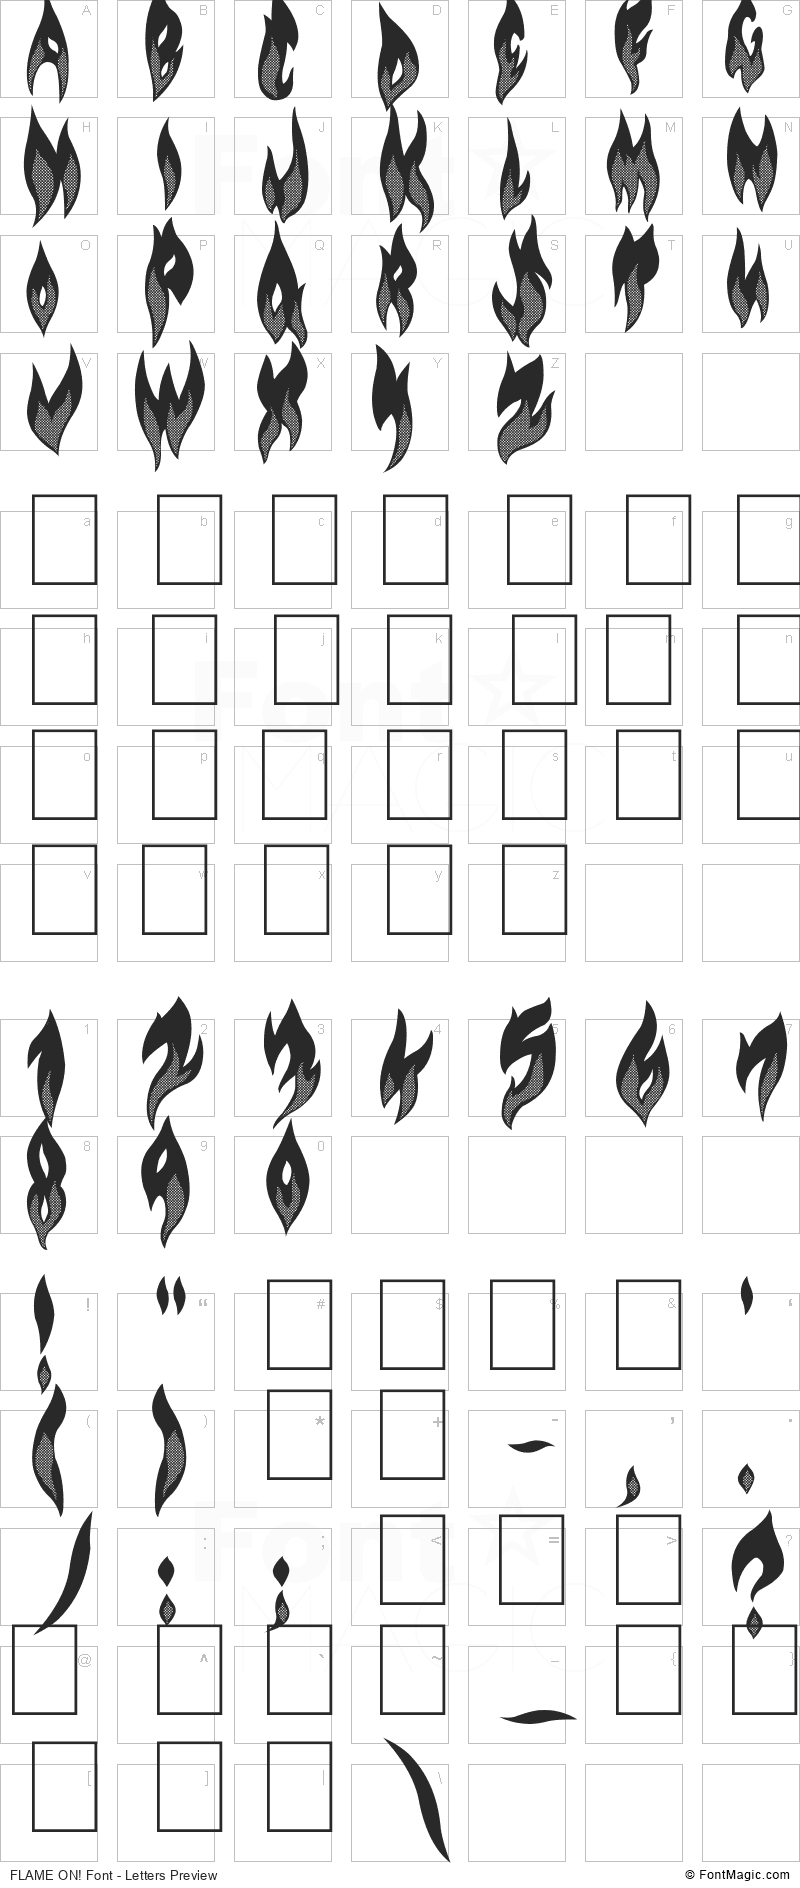 FLAME ON! Font - All Latters Preview Chart